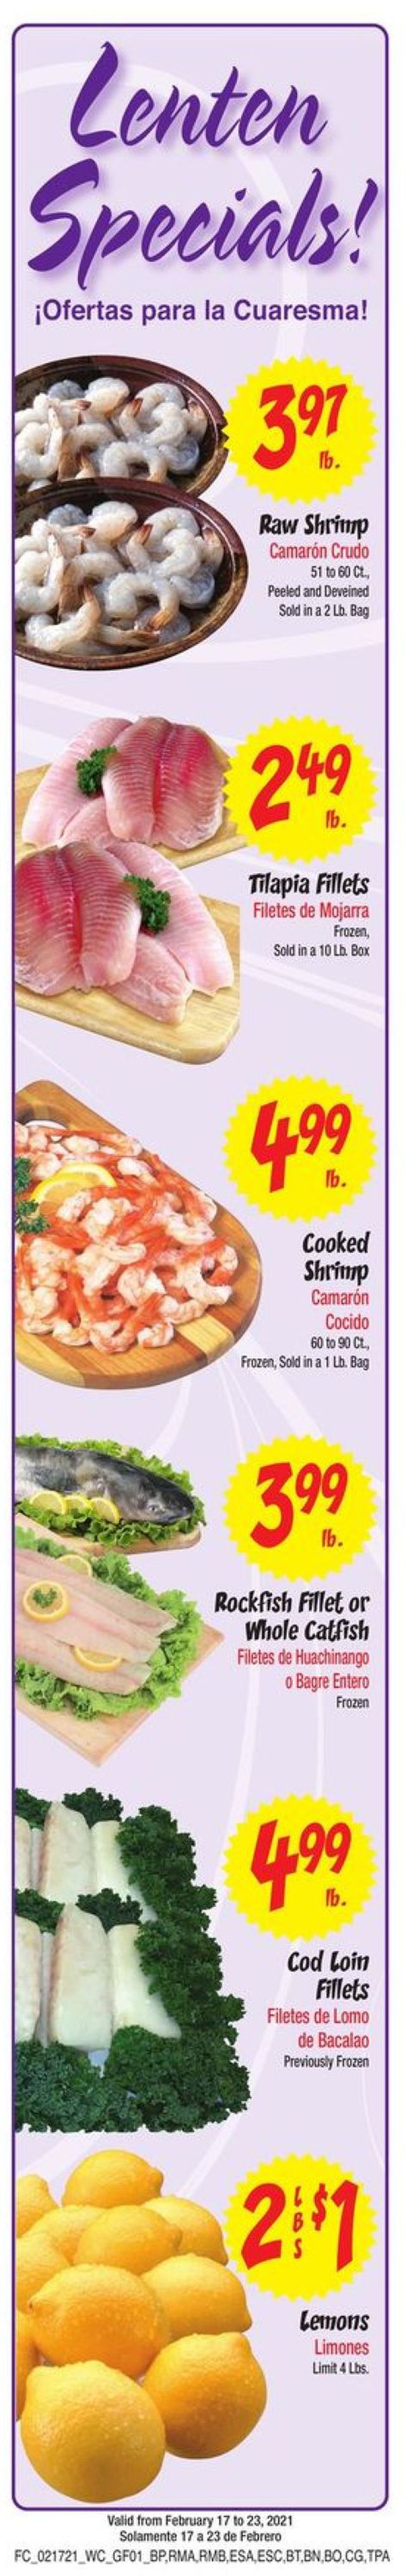 Food City Ad from 02/17/2021